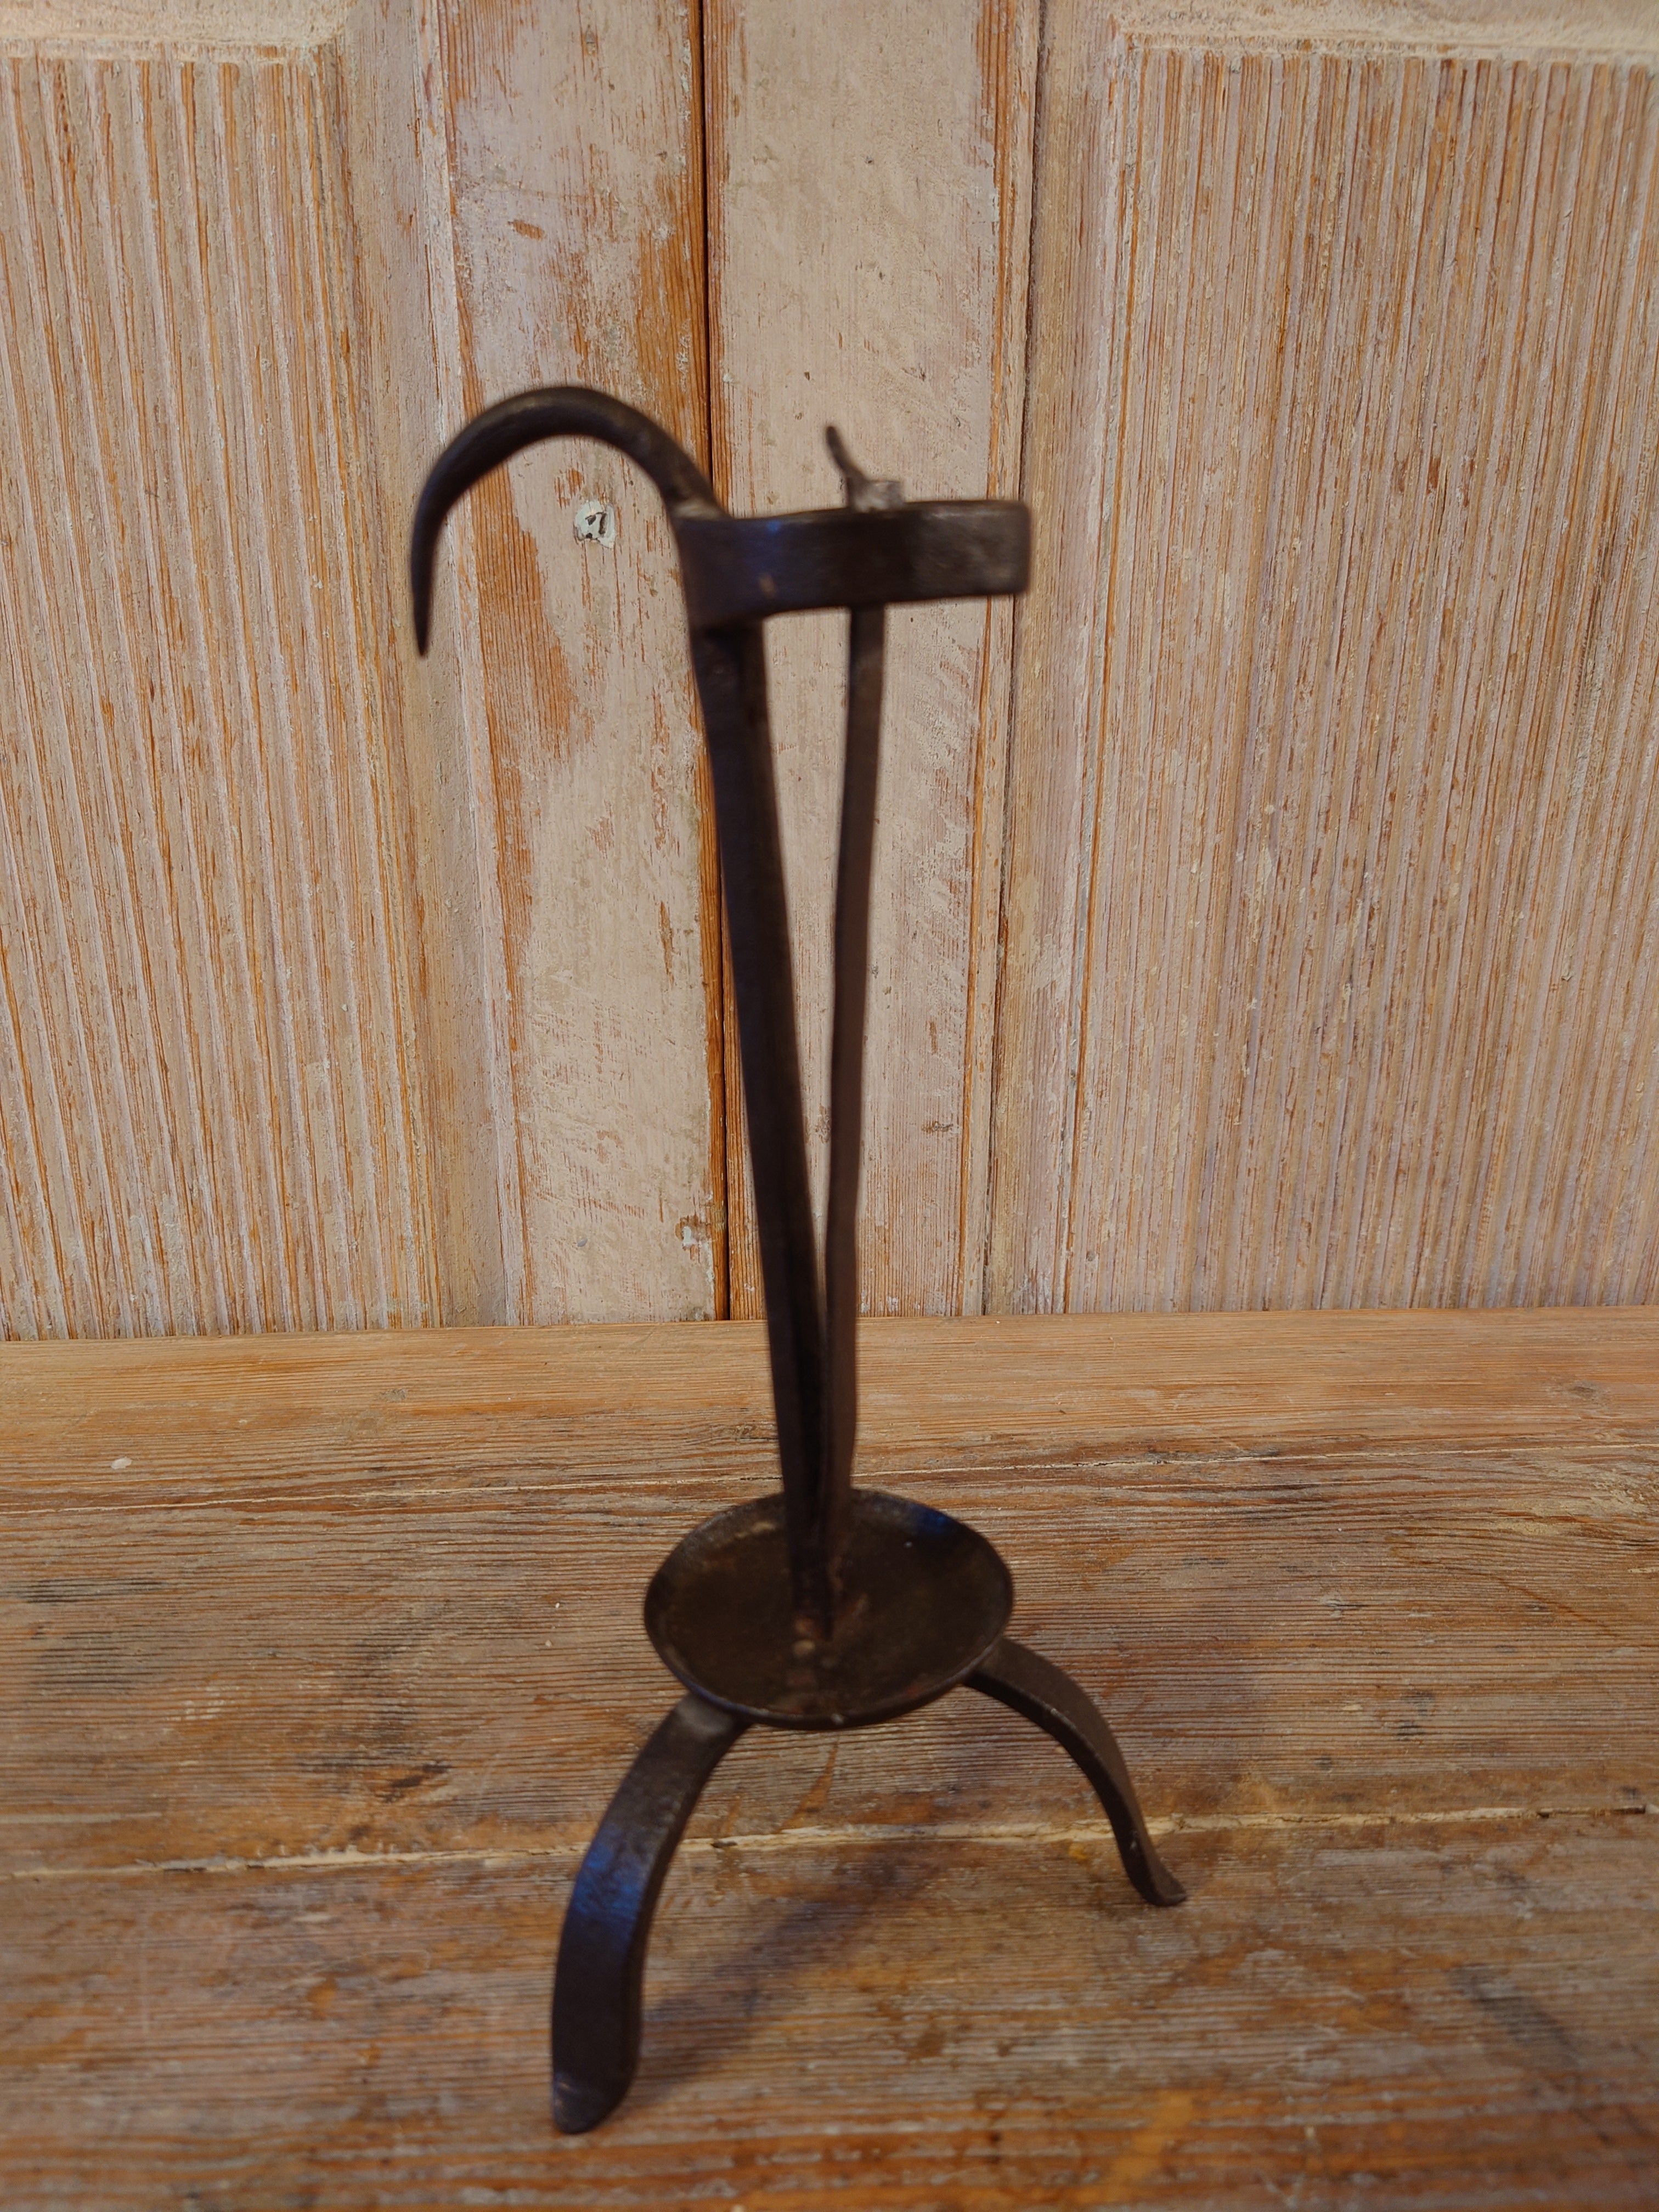 An old antique swedish 18th century iron candlestick .
Very charming and solid.
The candlestick is called 